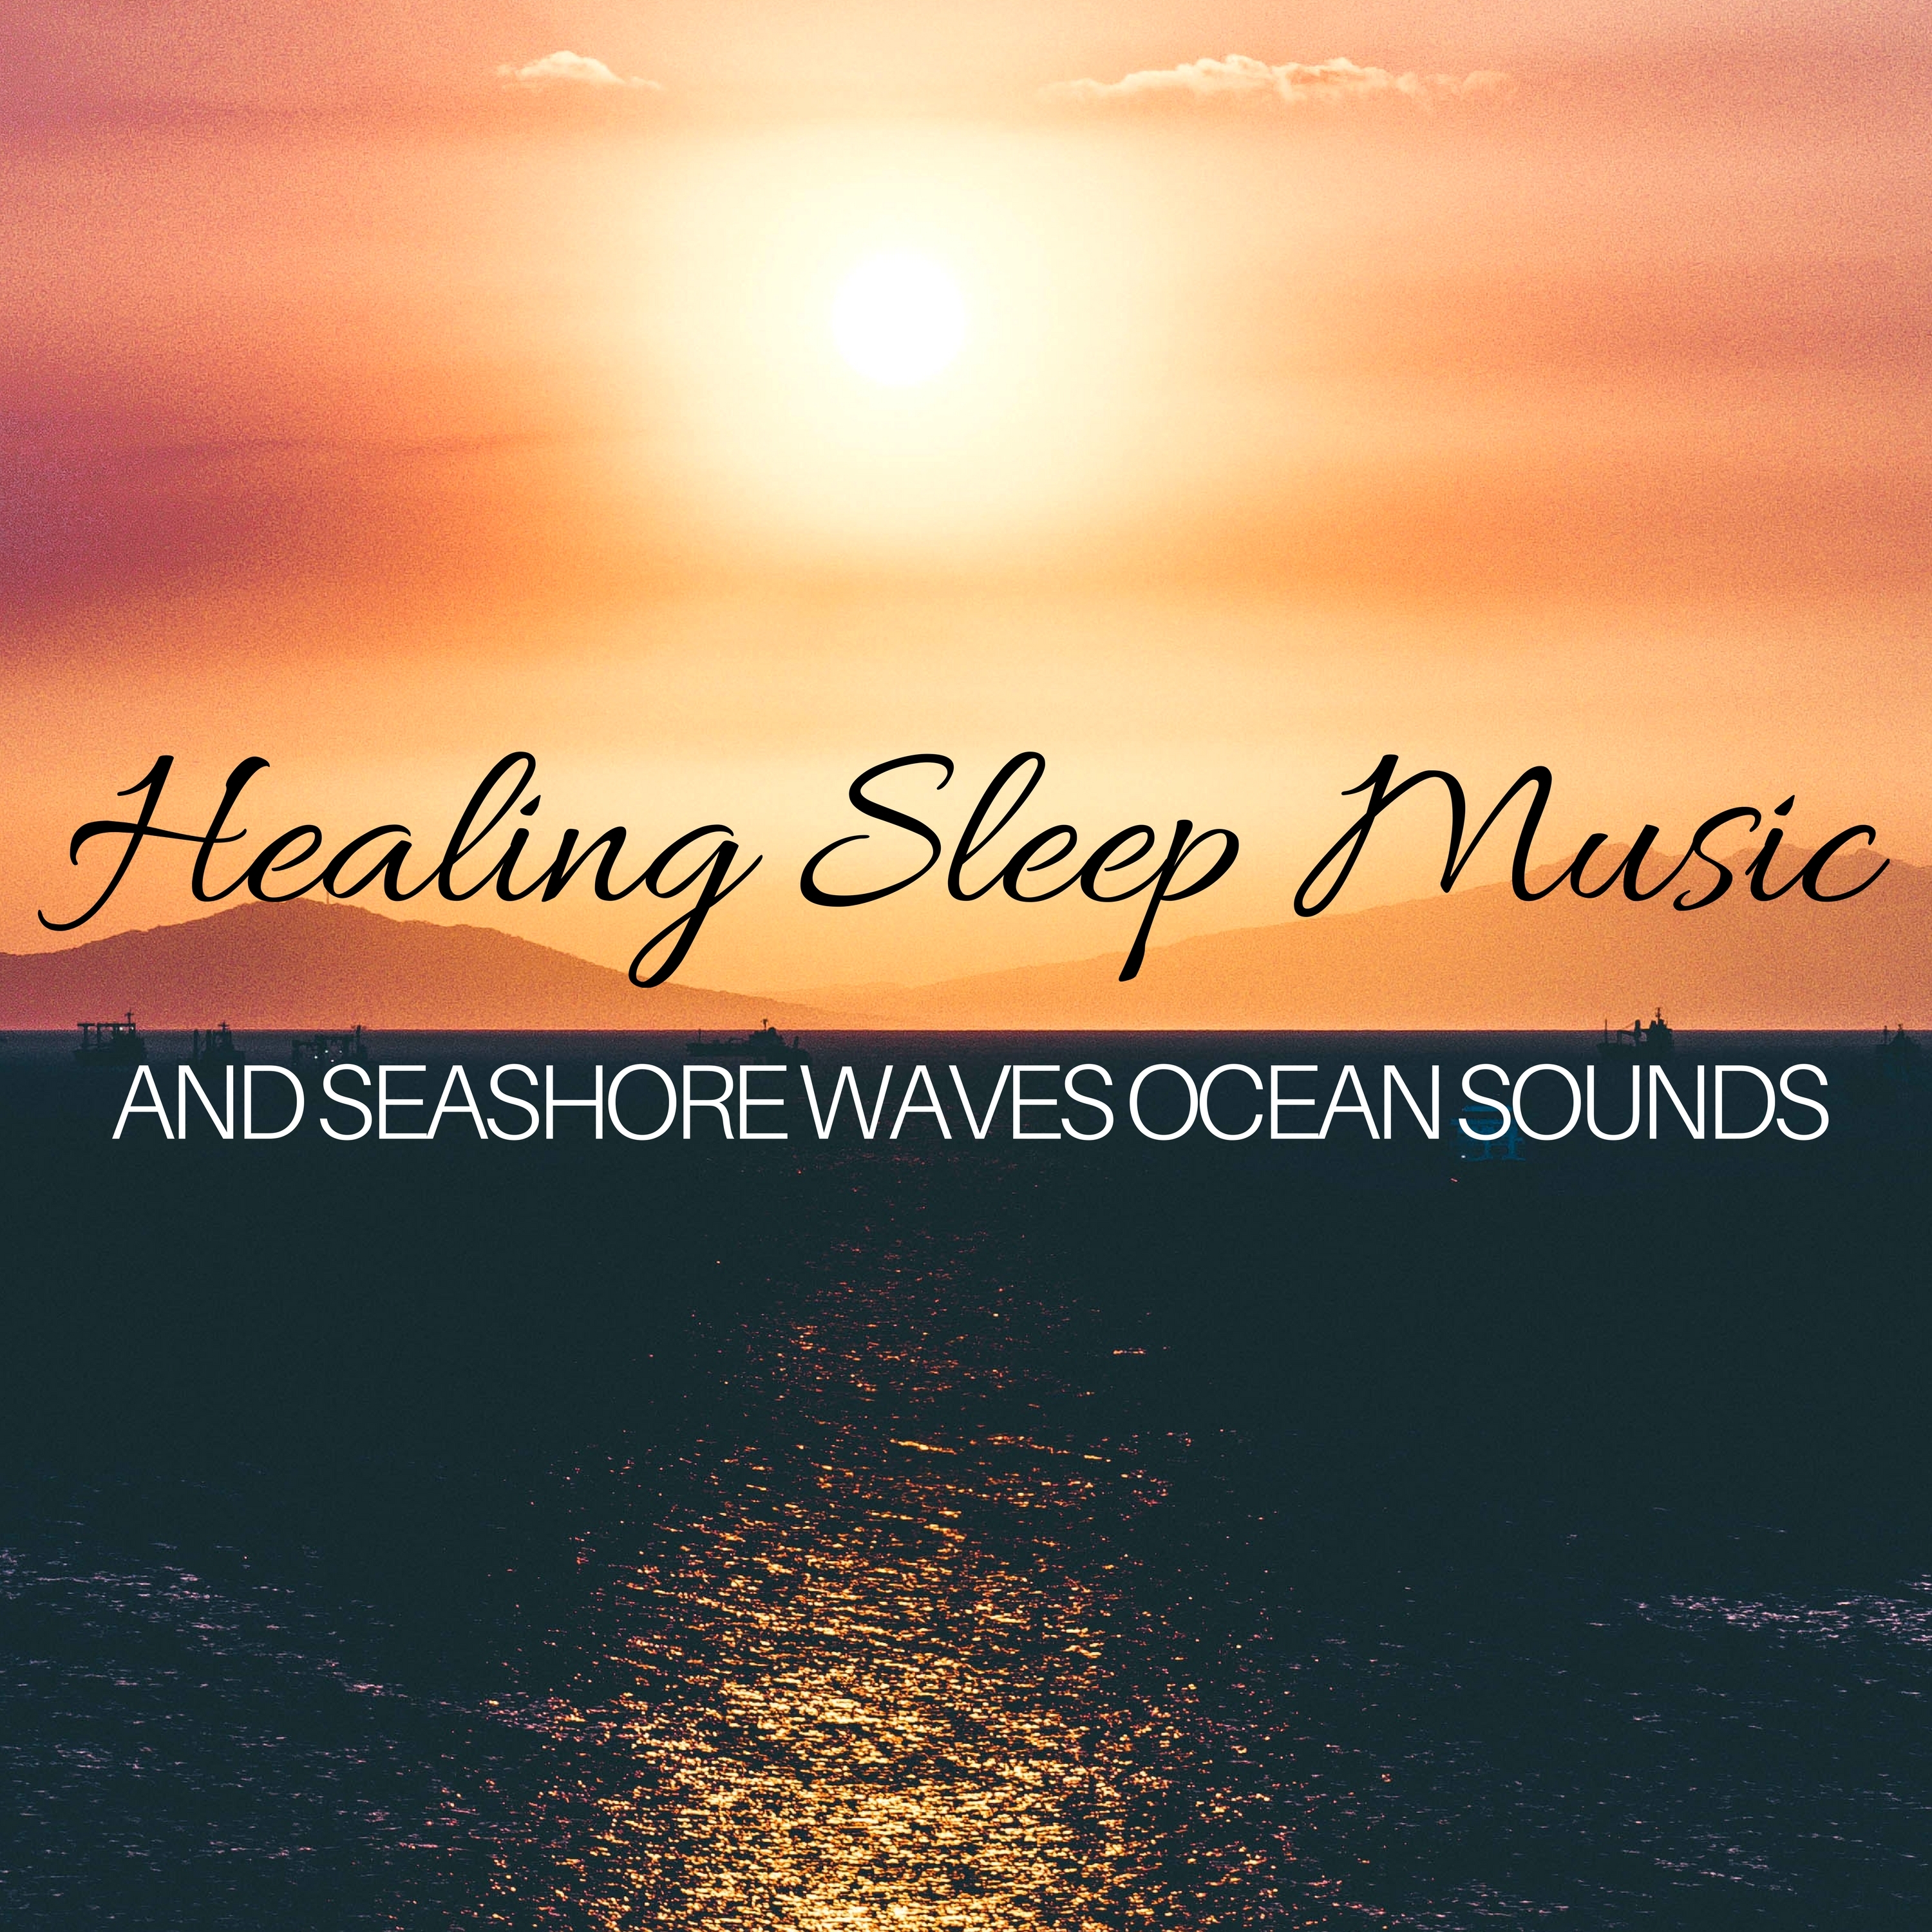 Healing Sleep Music and Seashore Waves Ocean Sounds for Relaxation and Sleep